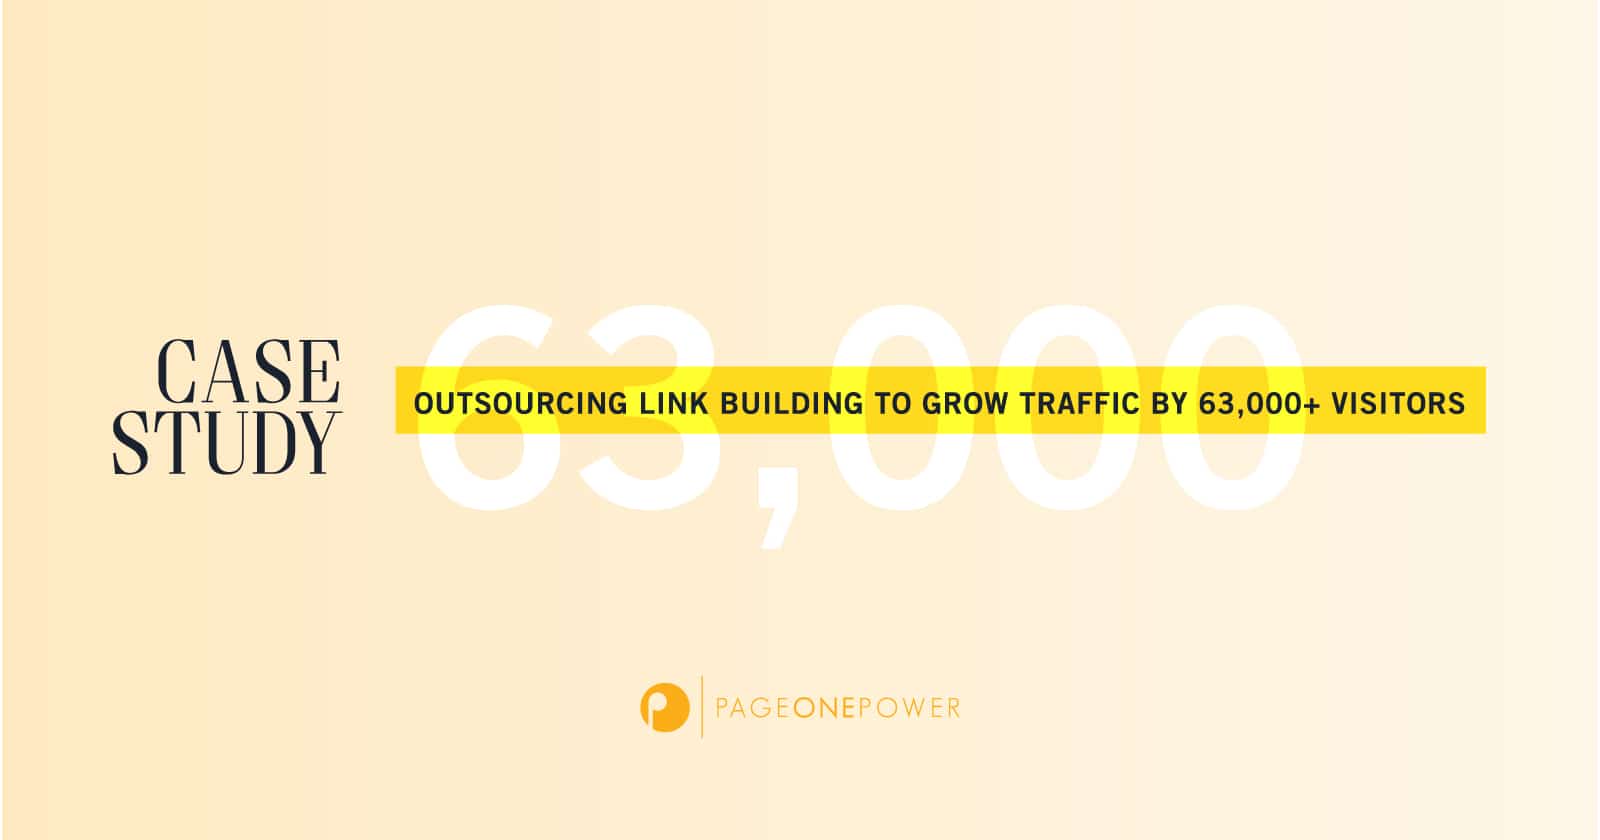 Case Study: Outsourcing Link Building to Grow Traffic by 63,000+ Visitors